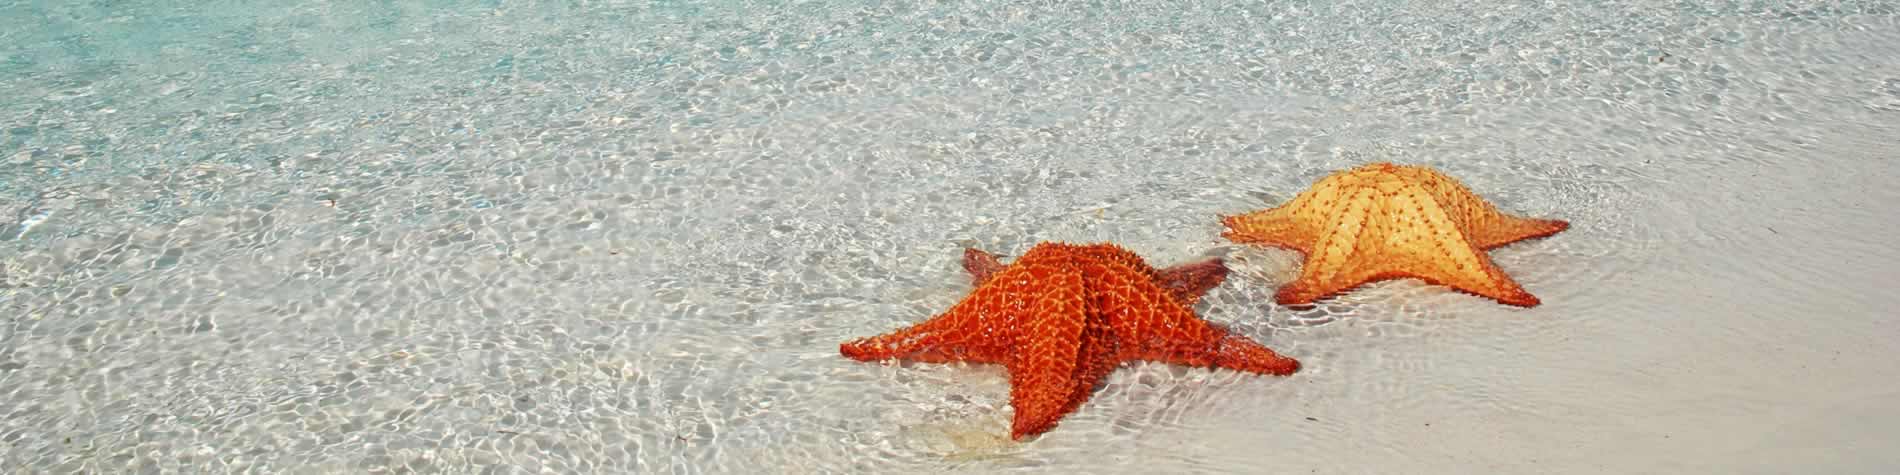 Starfish at the shore of the beach